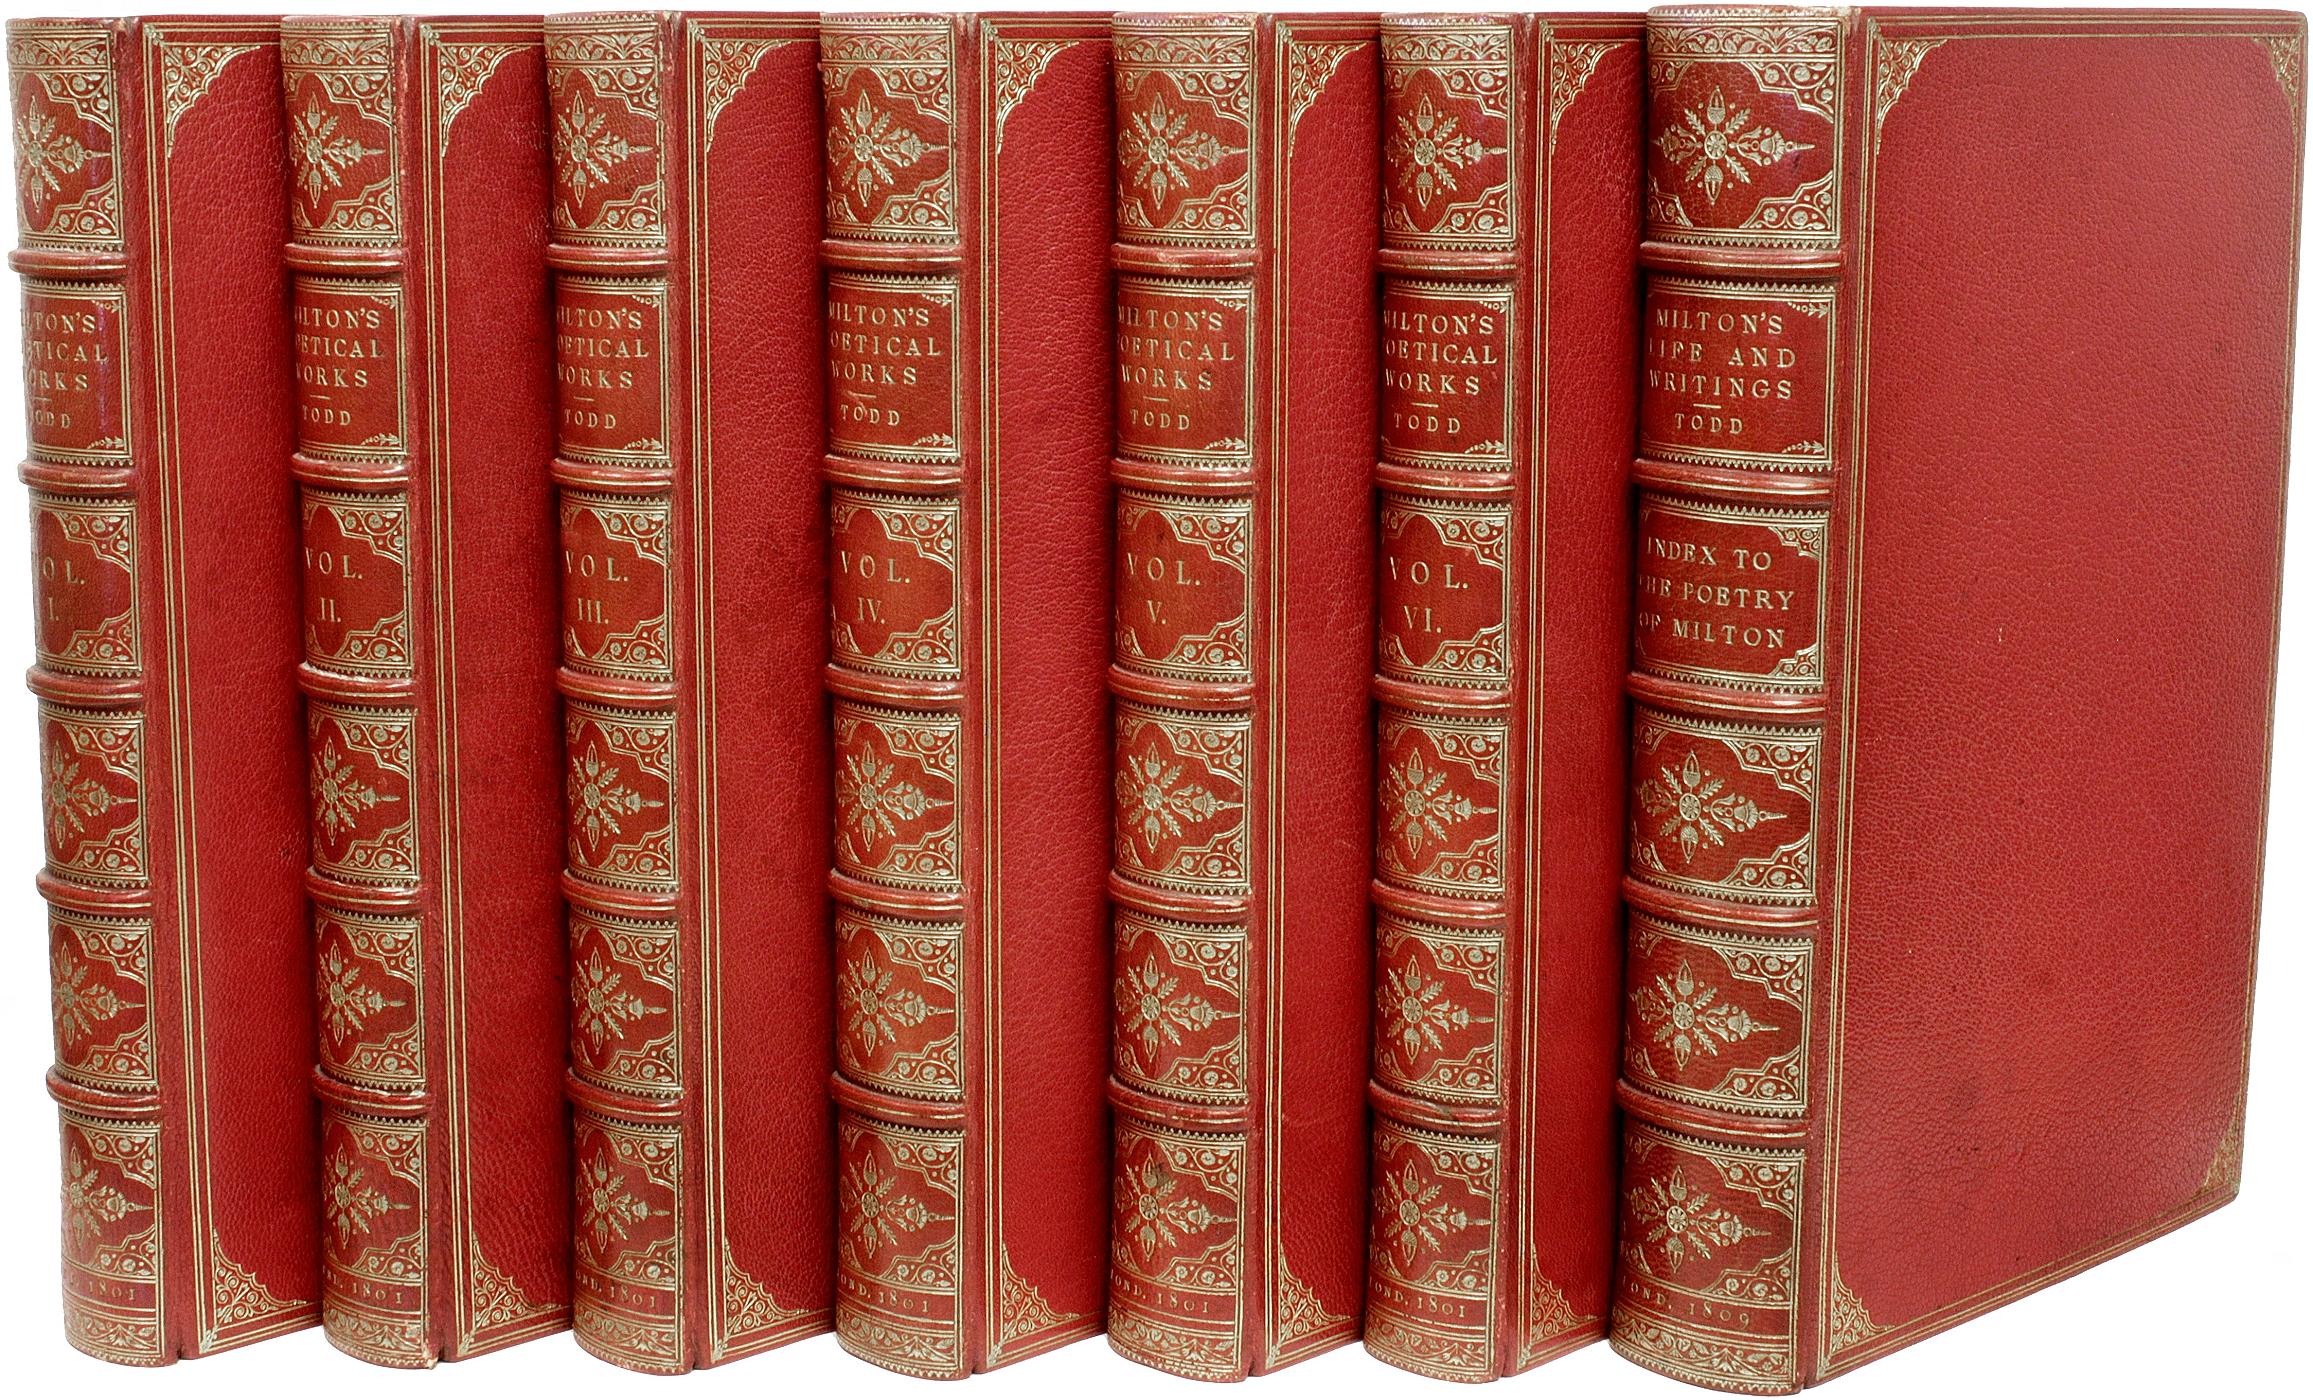 AUTHOR: MILTON, John (Rev. Henry John Todd)

TITLE: The Poetical Works of John Milton - WITH -  Some Account of His Life And Writings.

PUBLISHER: London: for many, 1801 - 1809.

DESCRIPTION: THE ROBERT HOE COPY. 7 vols., royal octavo large paper